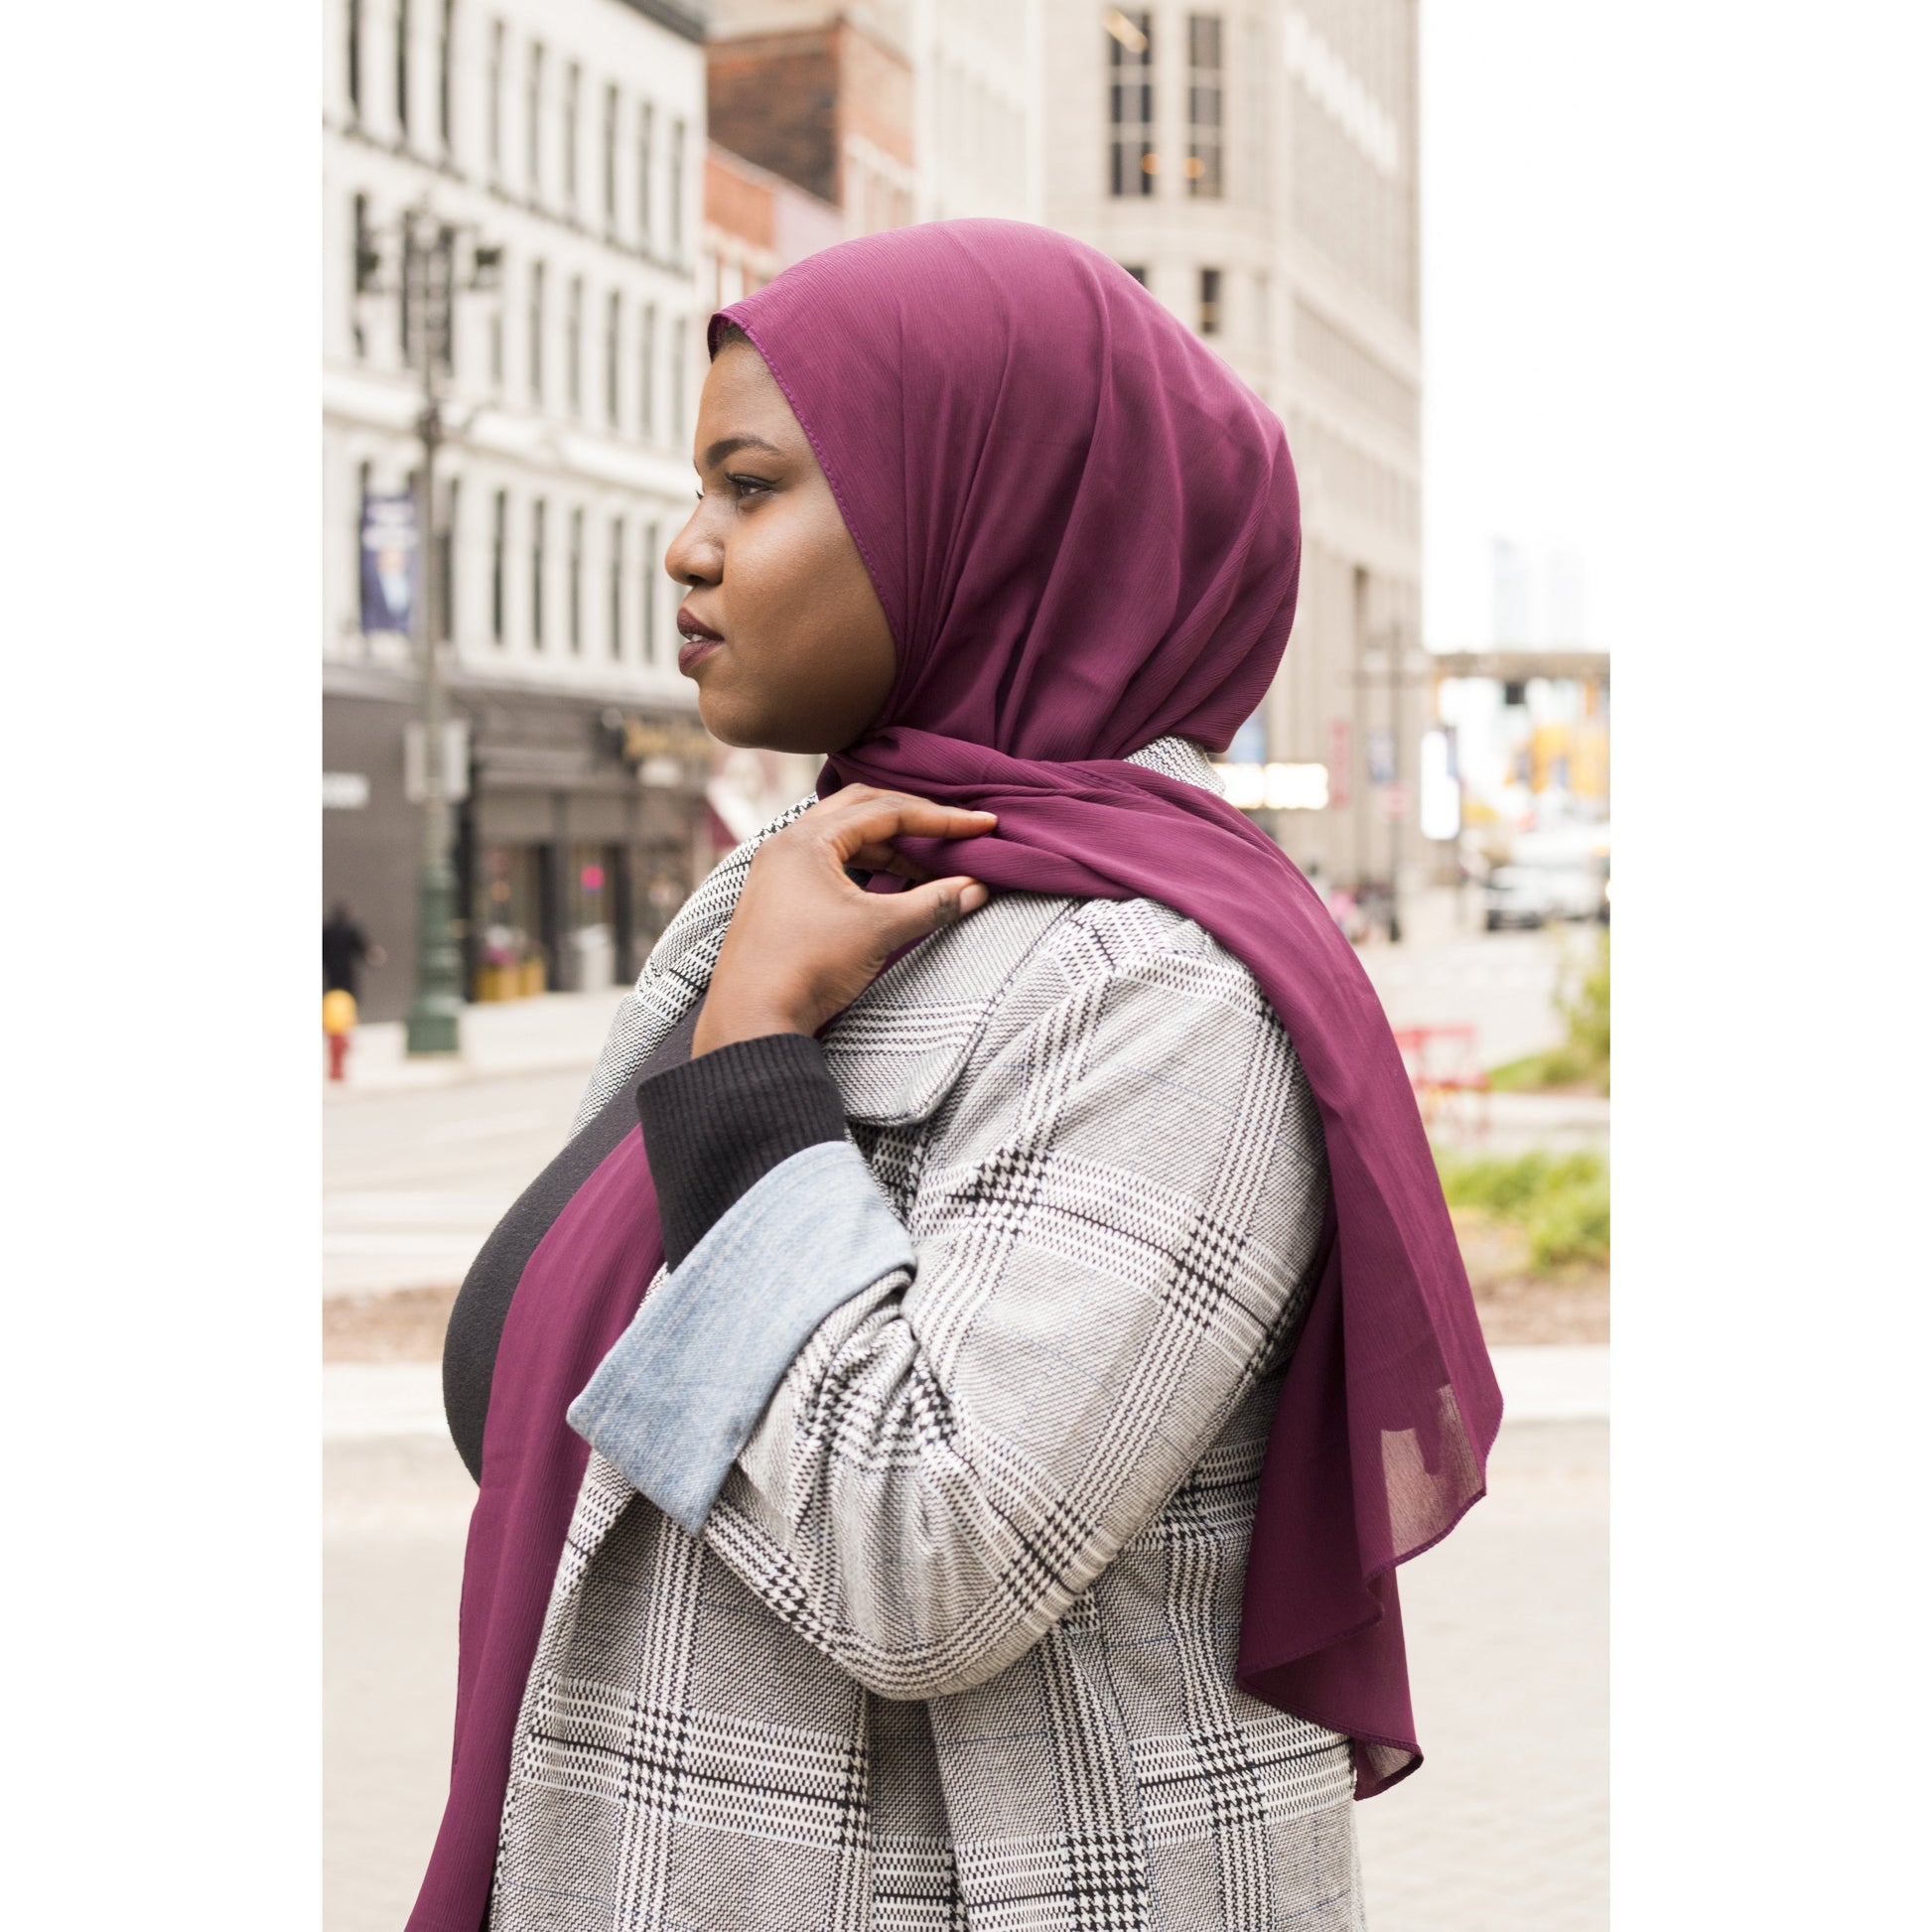 Chiffon - Vineyard Grape - Modestia Collection is a Detroit scarf based brand with a curated for Detroiter's and to the eclectic style of scarf lovers around the globe.